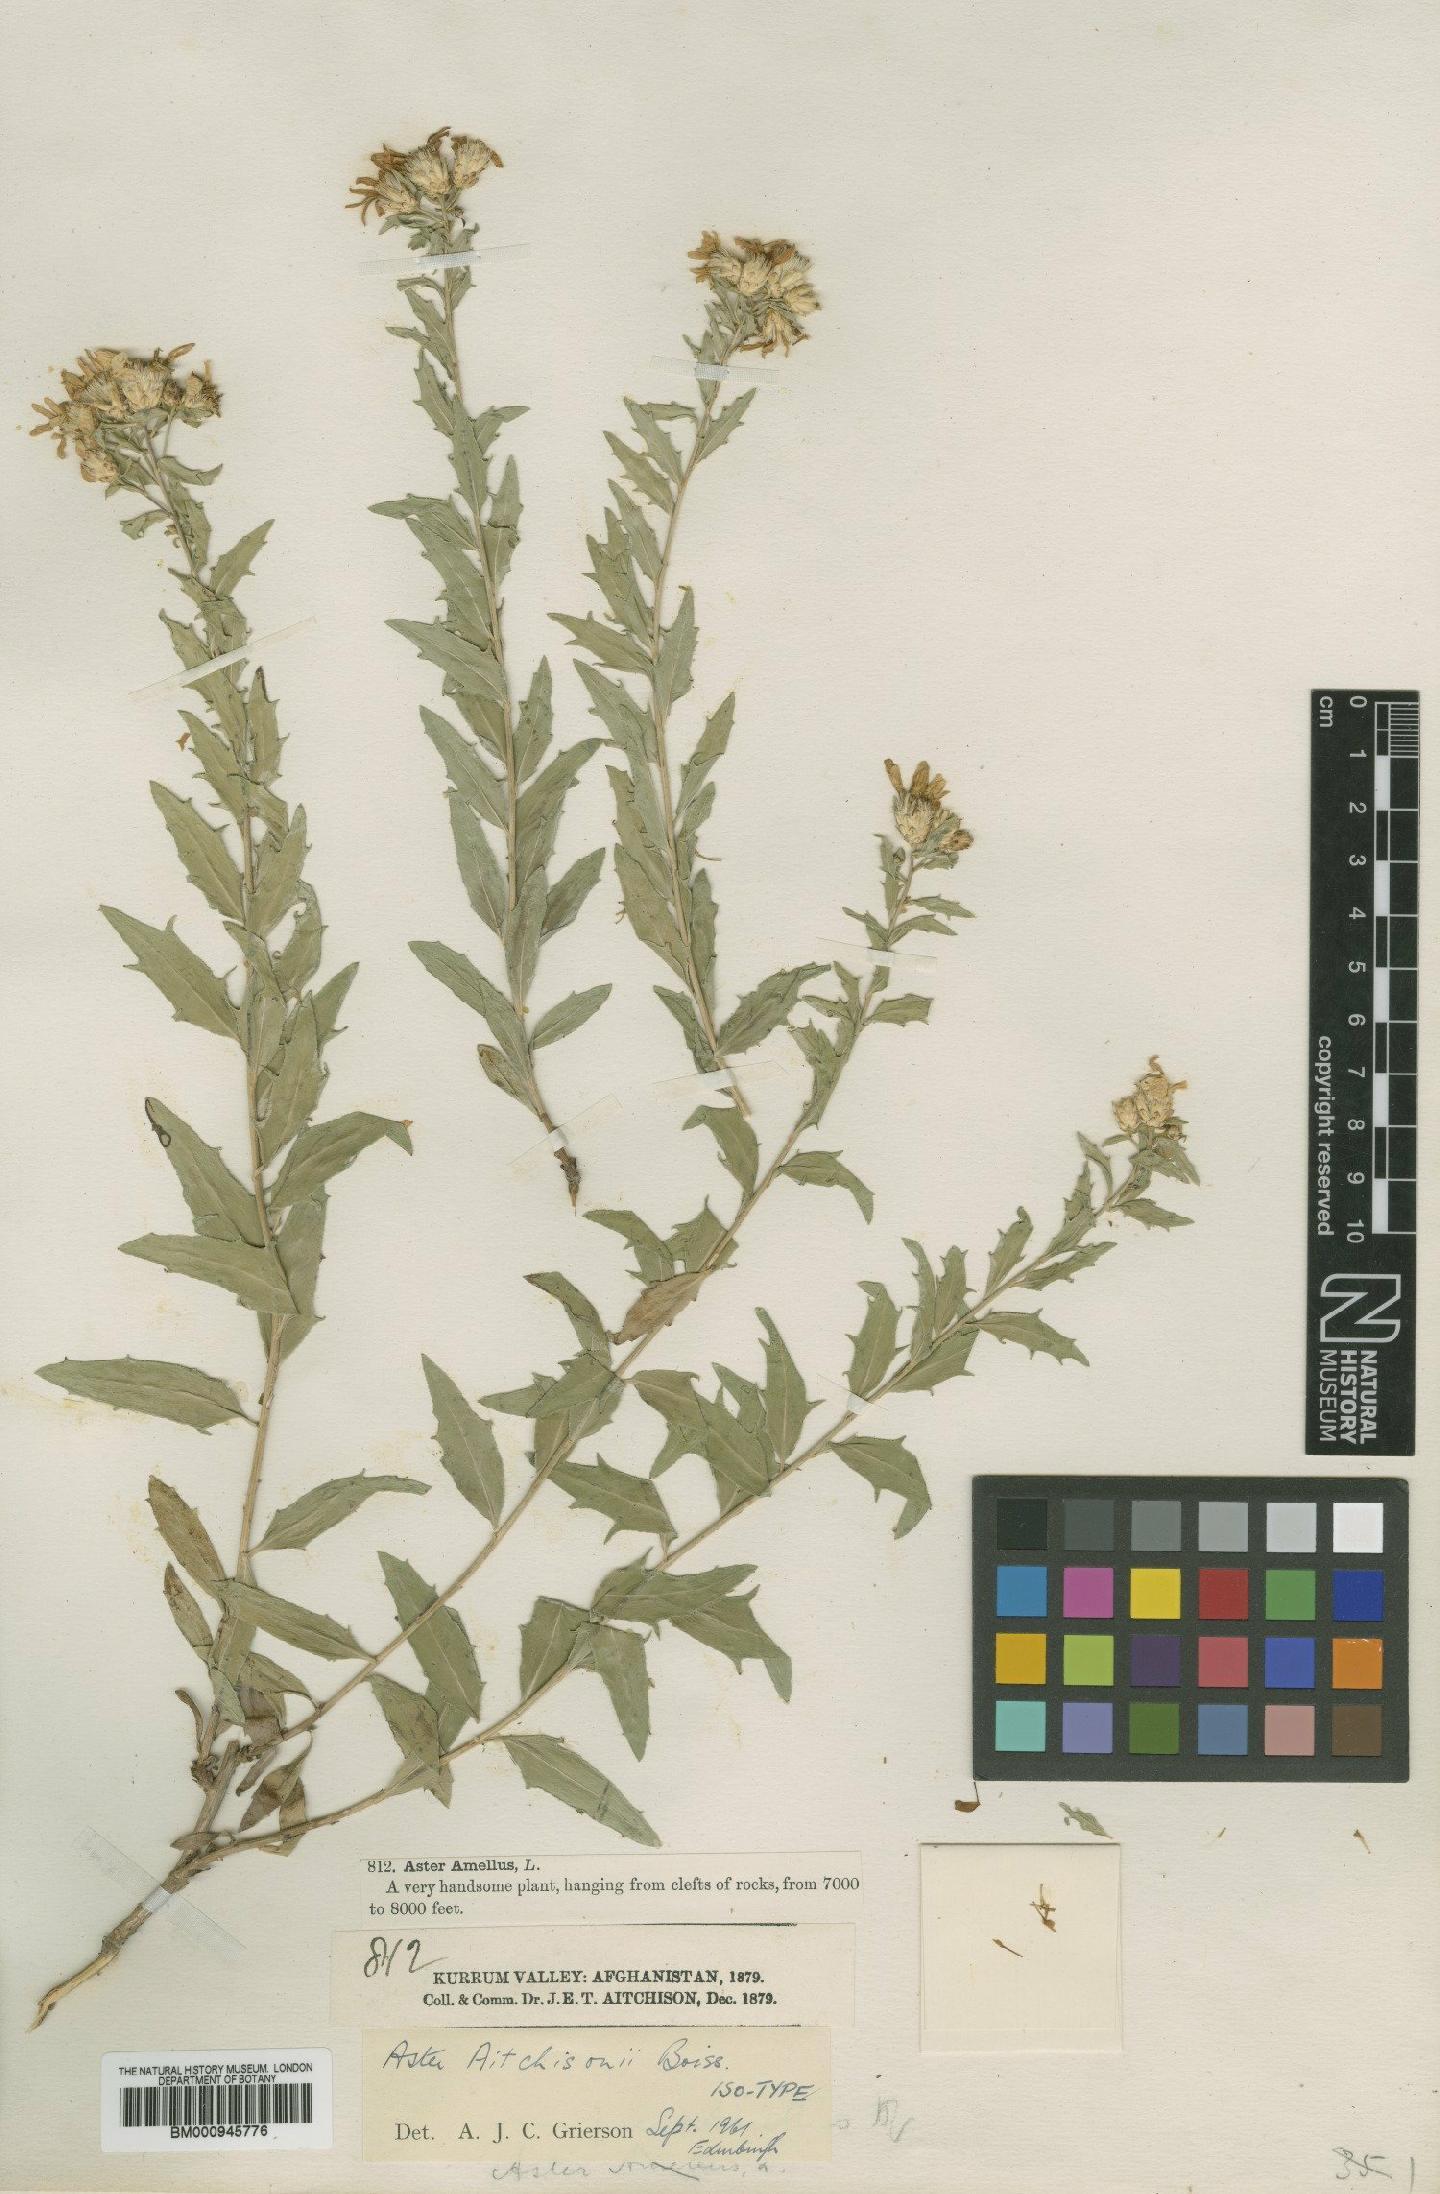 To NHMUK collection (Aster aitchisonii Boiss.; Isotype; NHMUK:ecatalogue:472115)